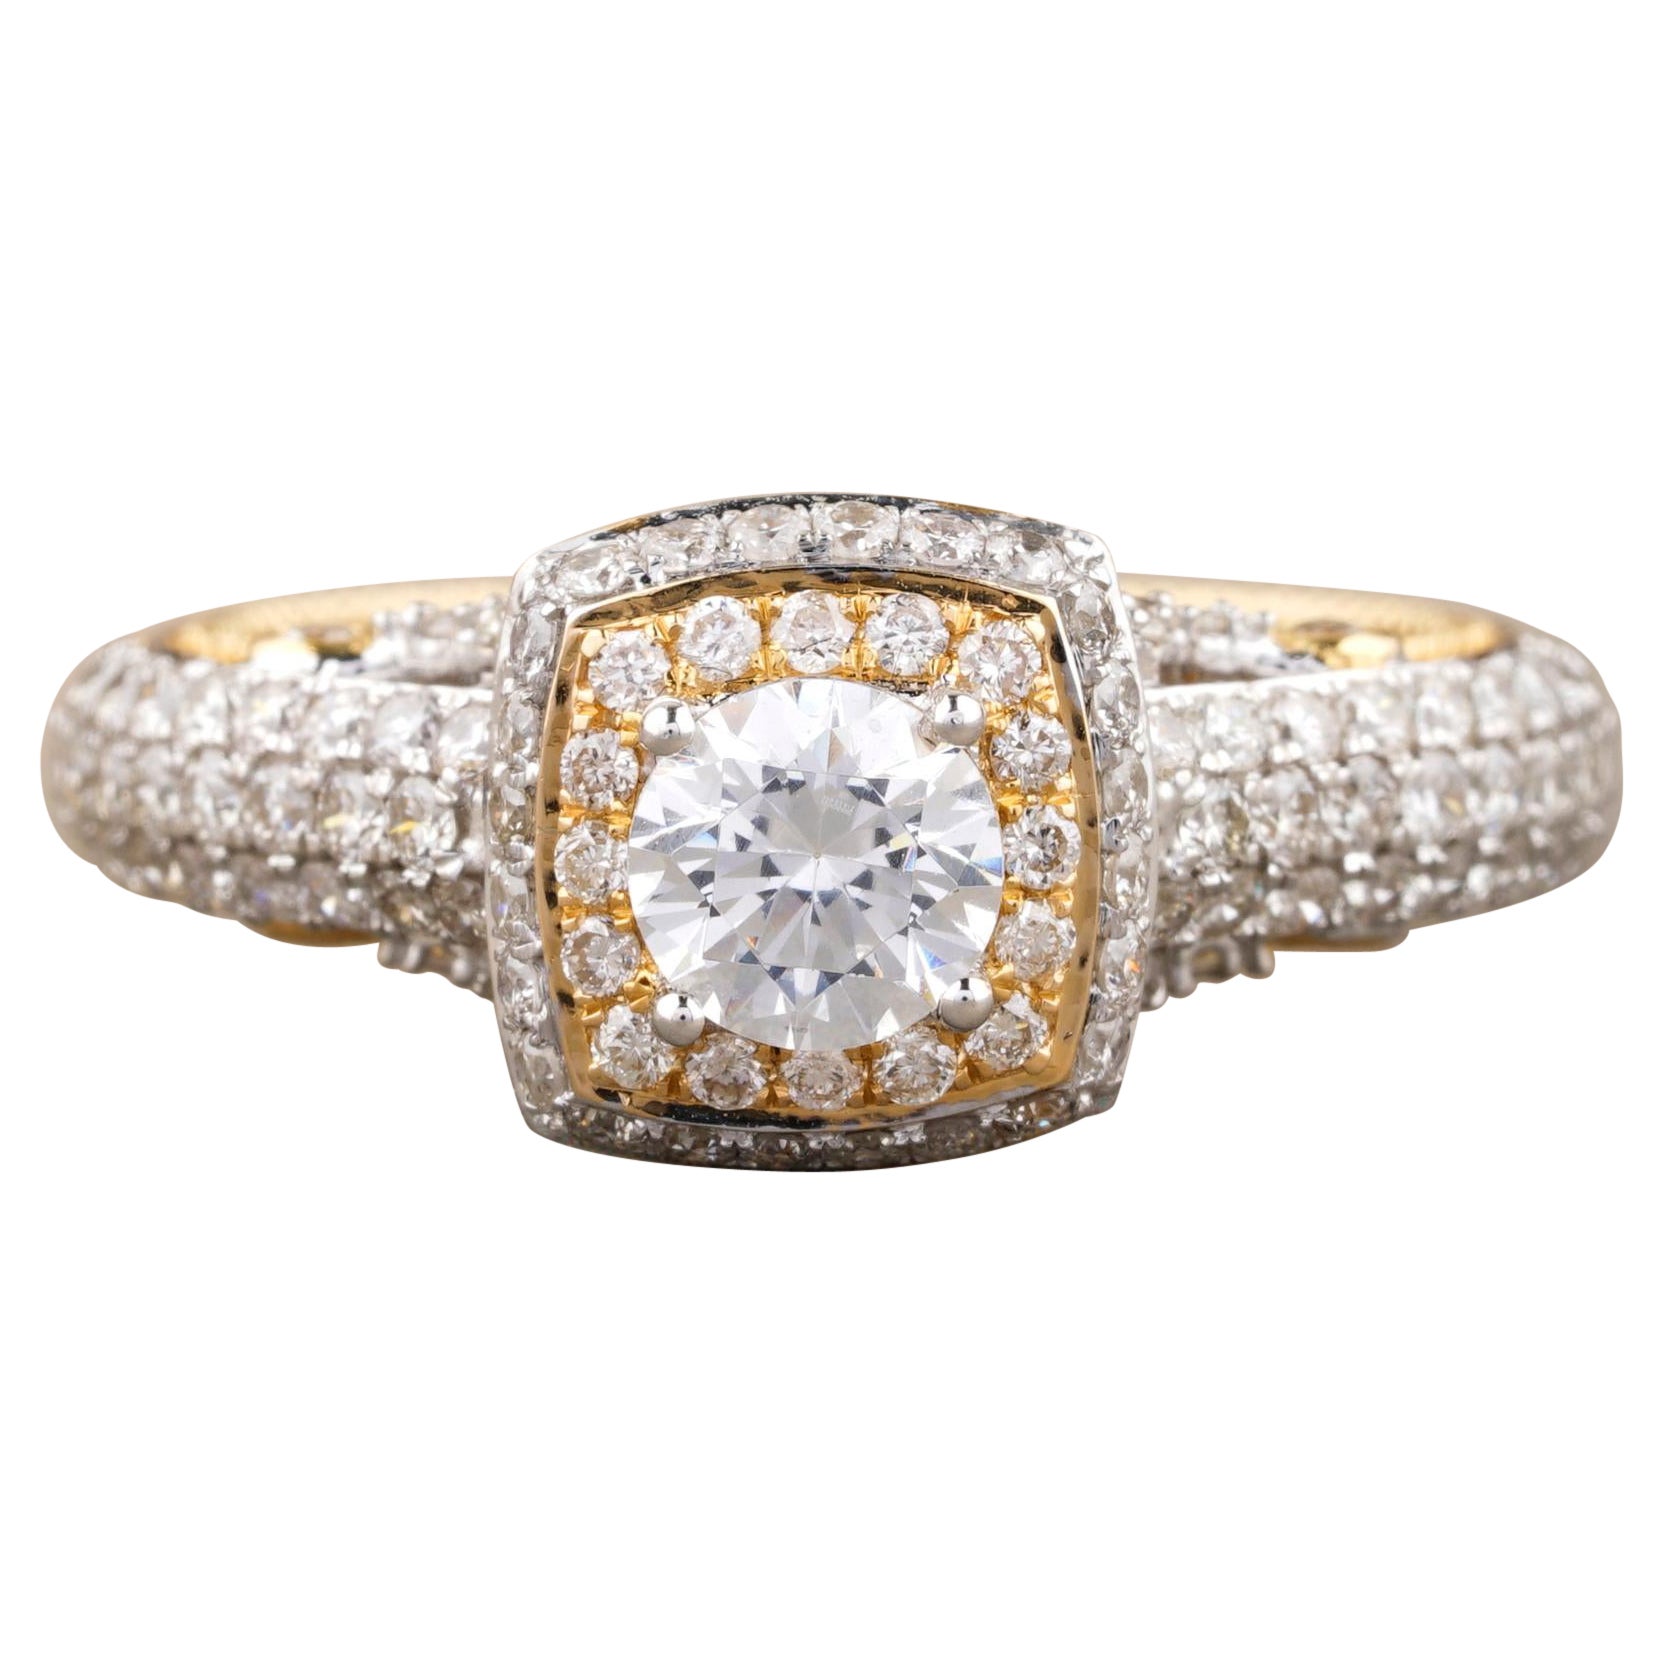 For Sale:  1 Carat Round Solitaire Diamond Ring with Illusion Setting in 18k Solid Gold